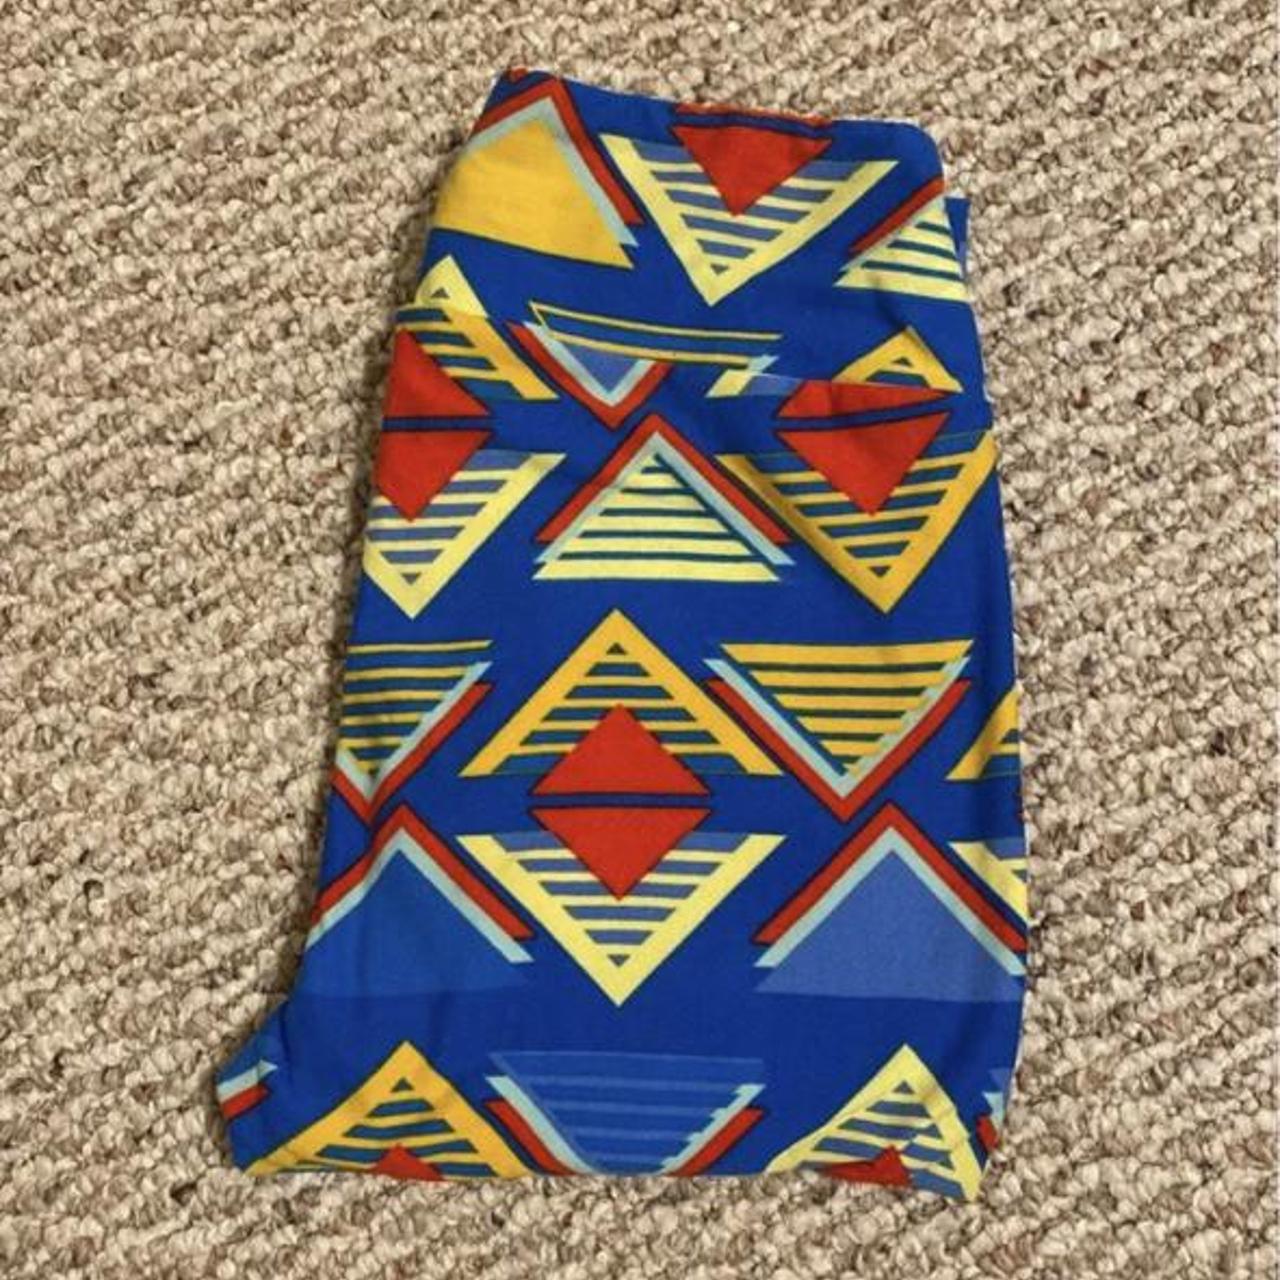 LuLaRoe Leggings Abstract Print One Size Fits Most - Depop